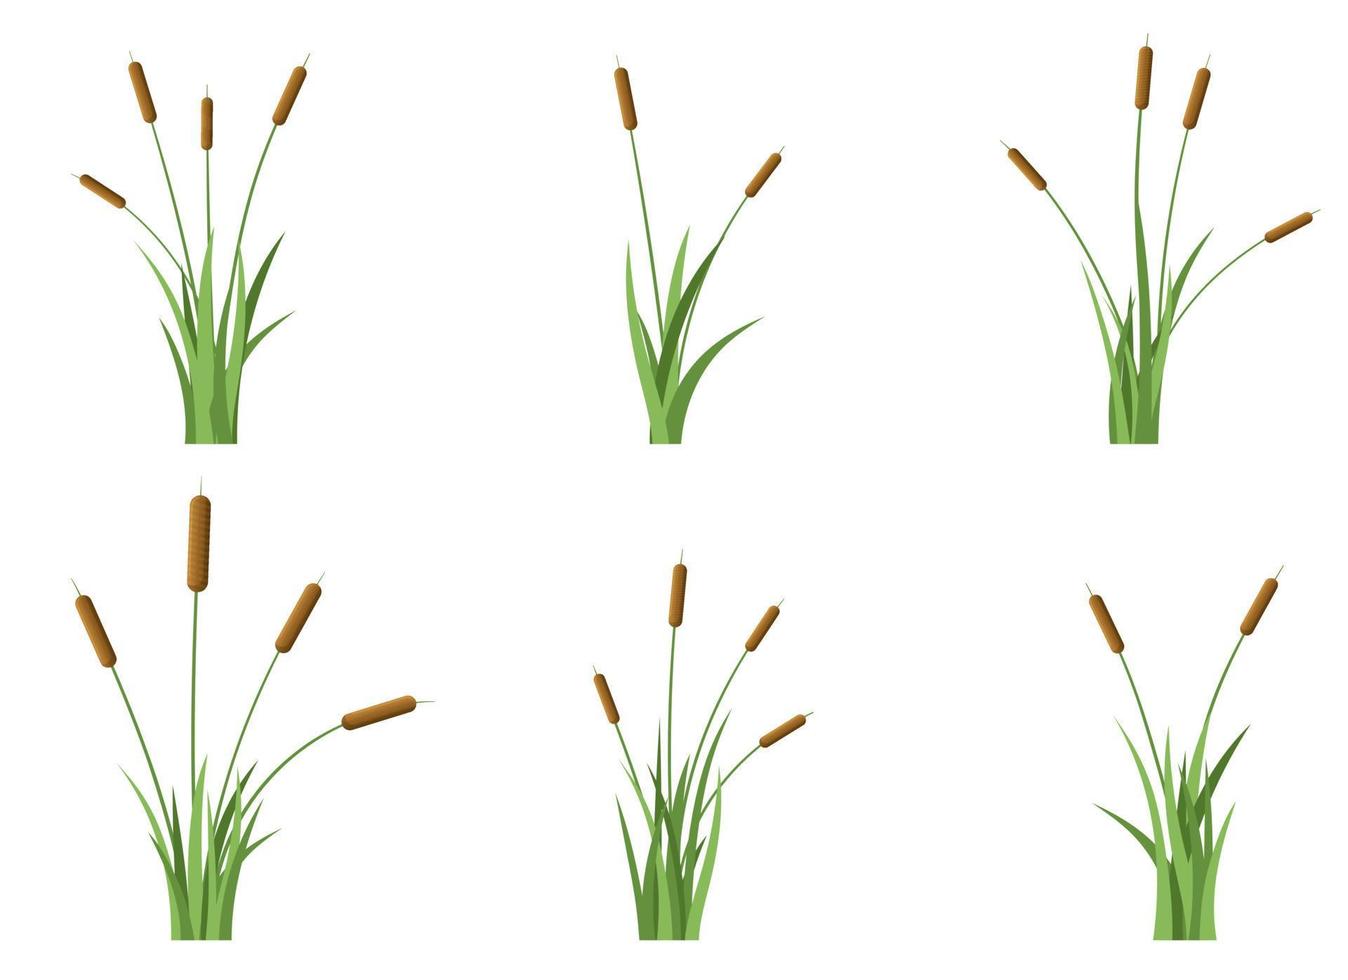 Grass with cattail vector design illustration isolated on white background